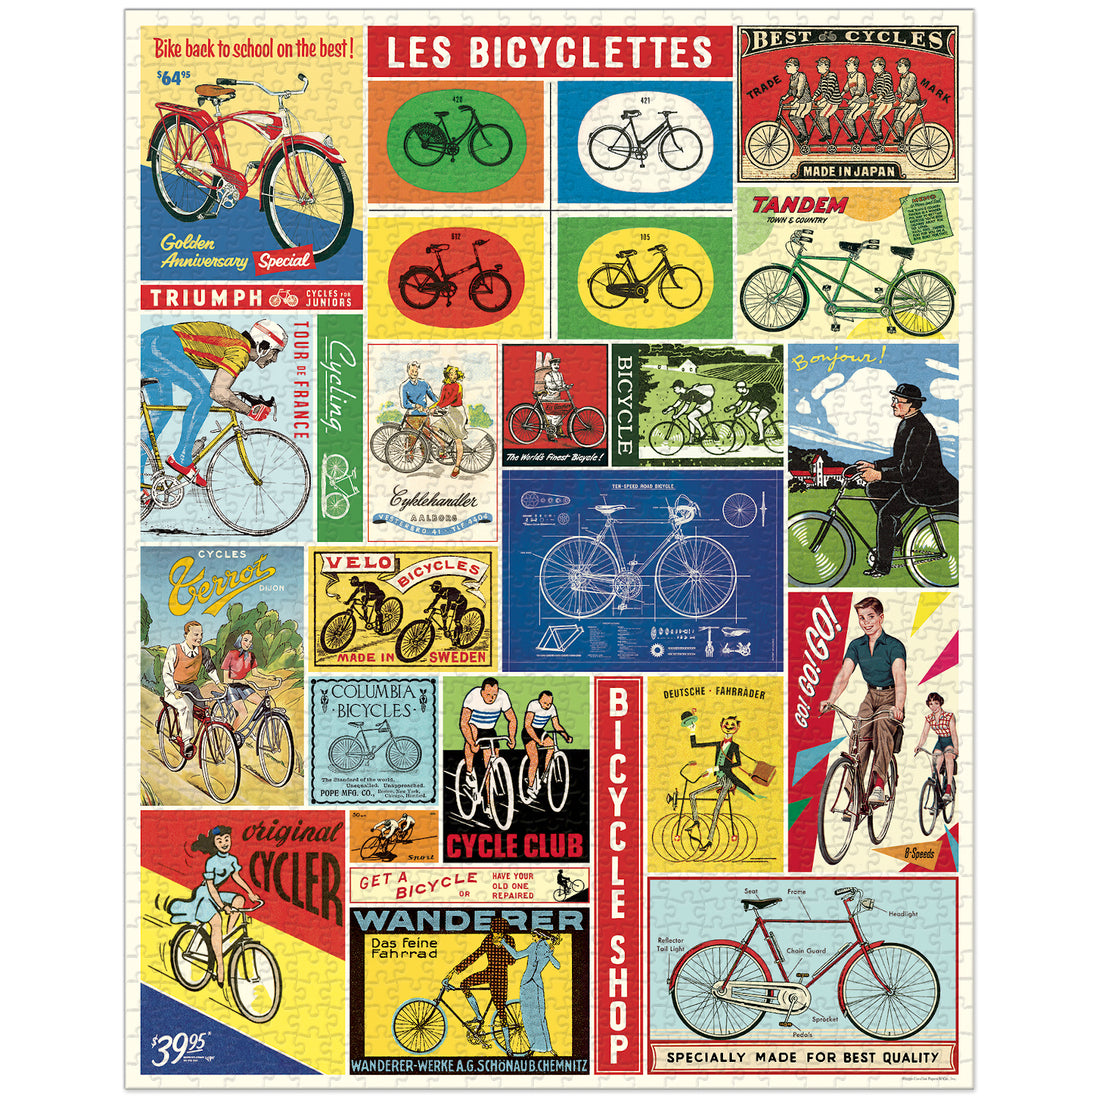 A Bicycles Puzzle in a cylindrical container with vintage illustrations of an arboretum, sourced from the Cavallini archives.